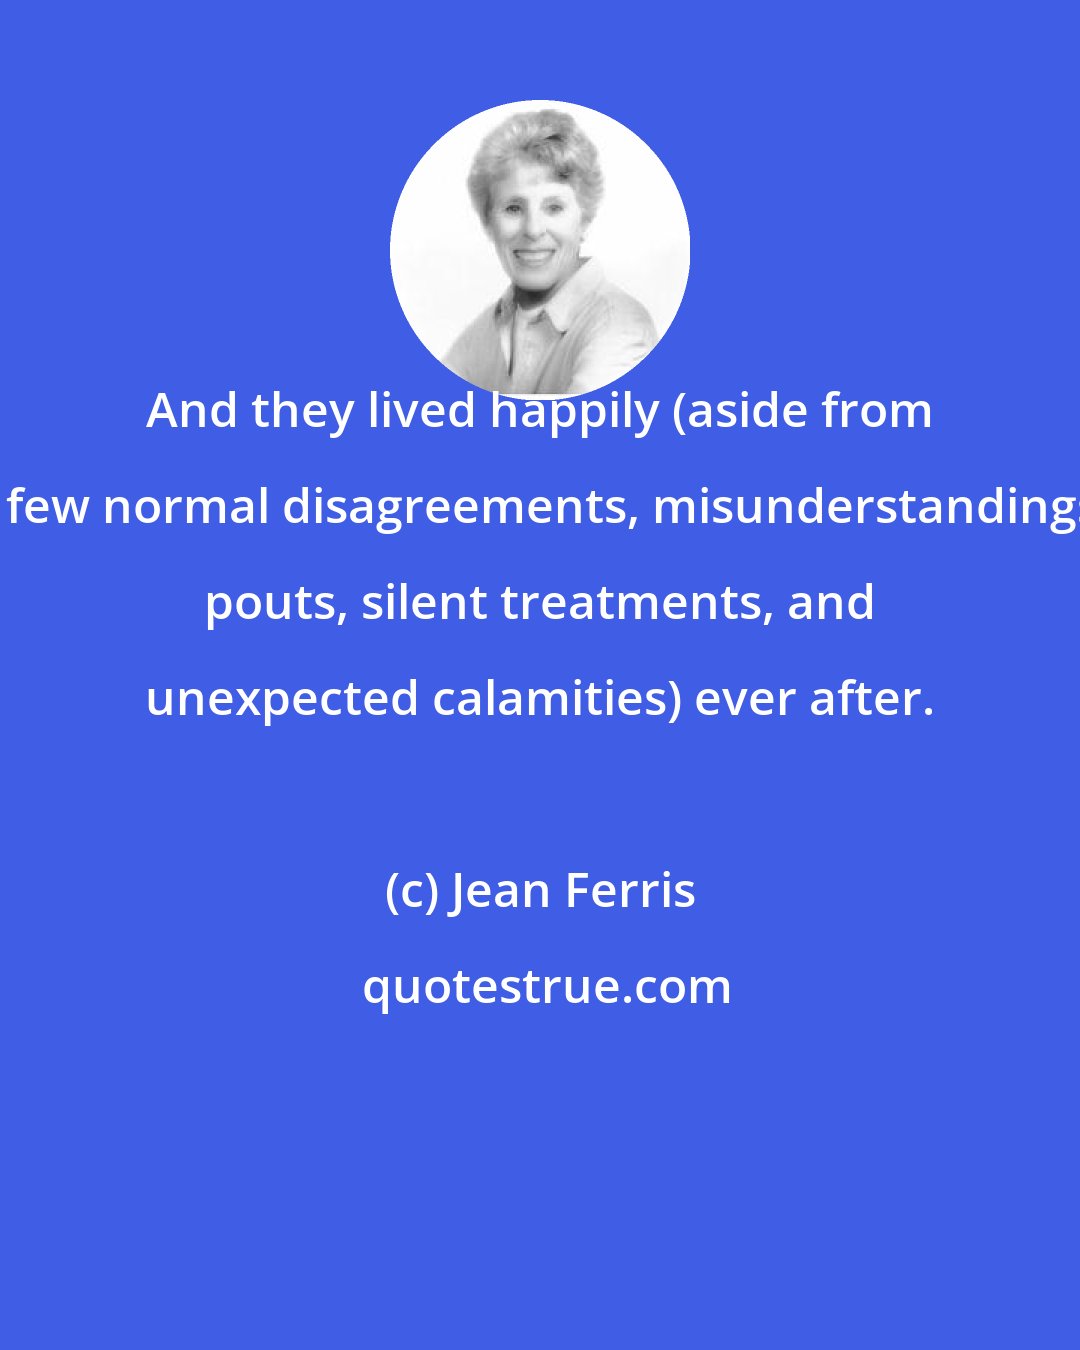 Jean Ferris: And they lived happily (aside from a few normal disagreements, misunderstandings, pouts, silent treatments, and unexpected calamities) ever after.